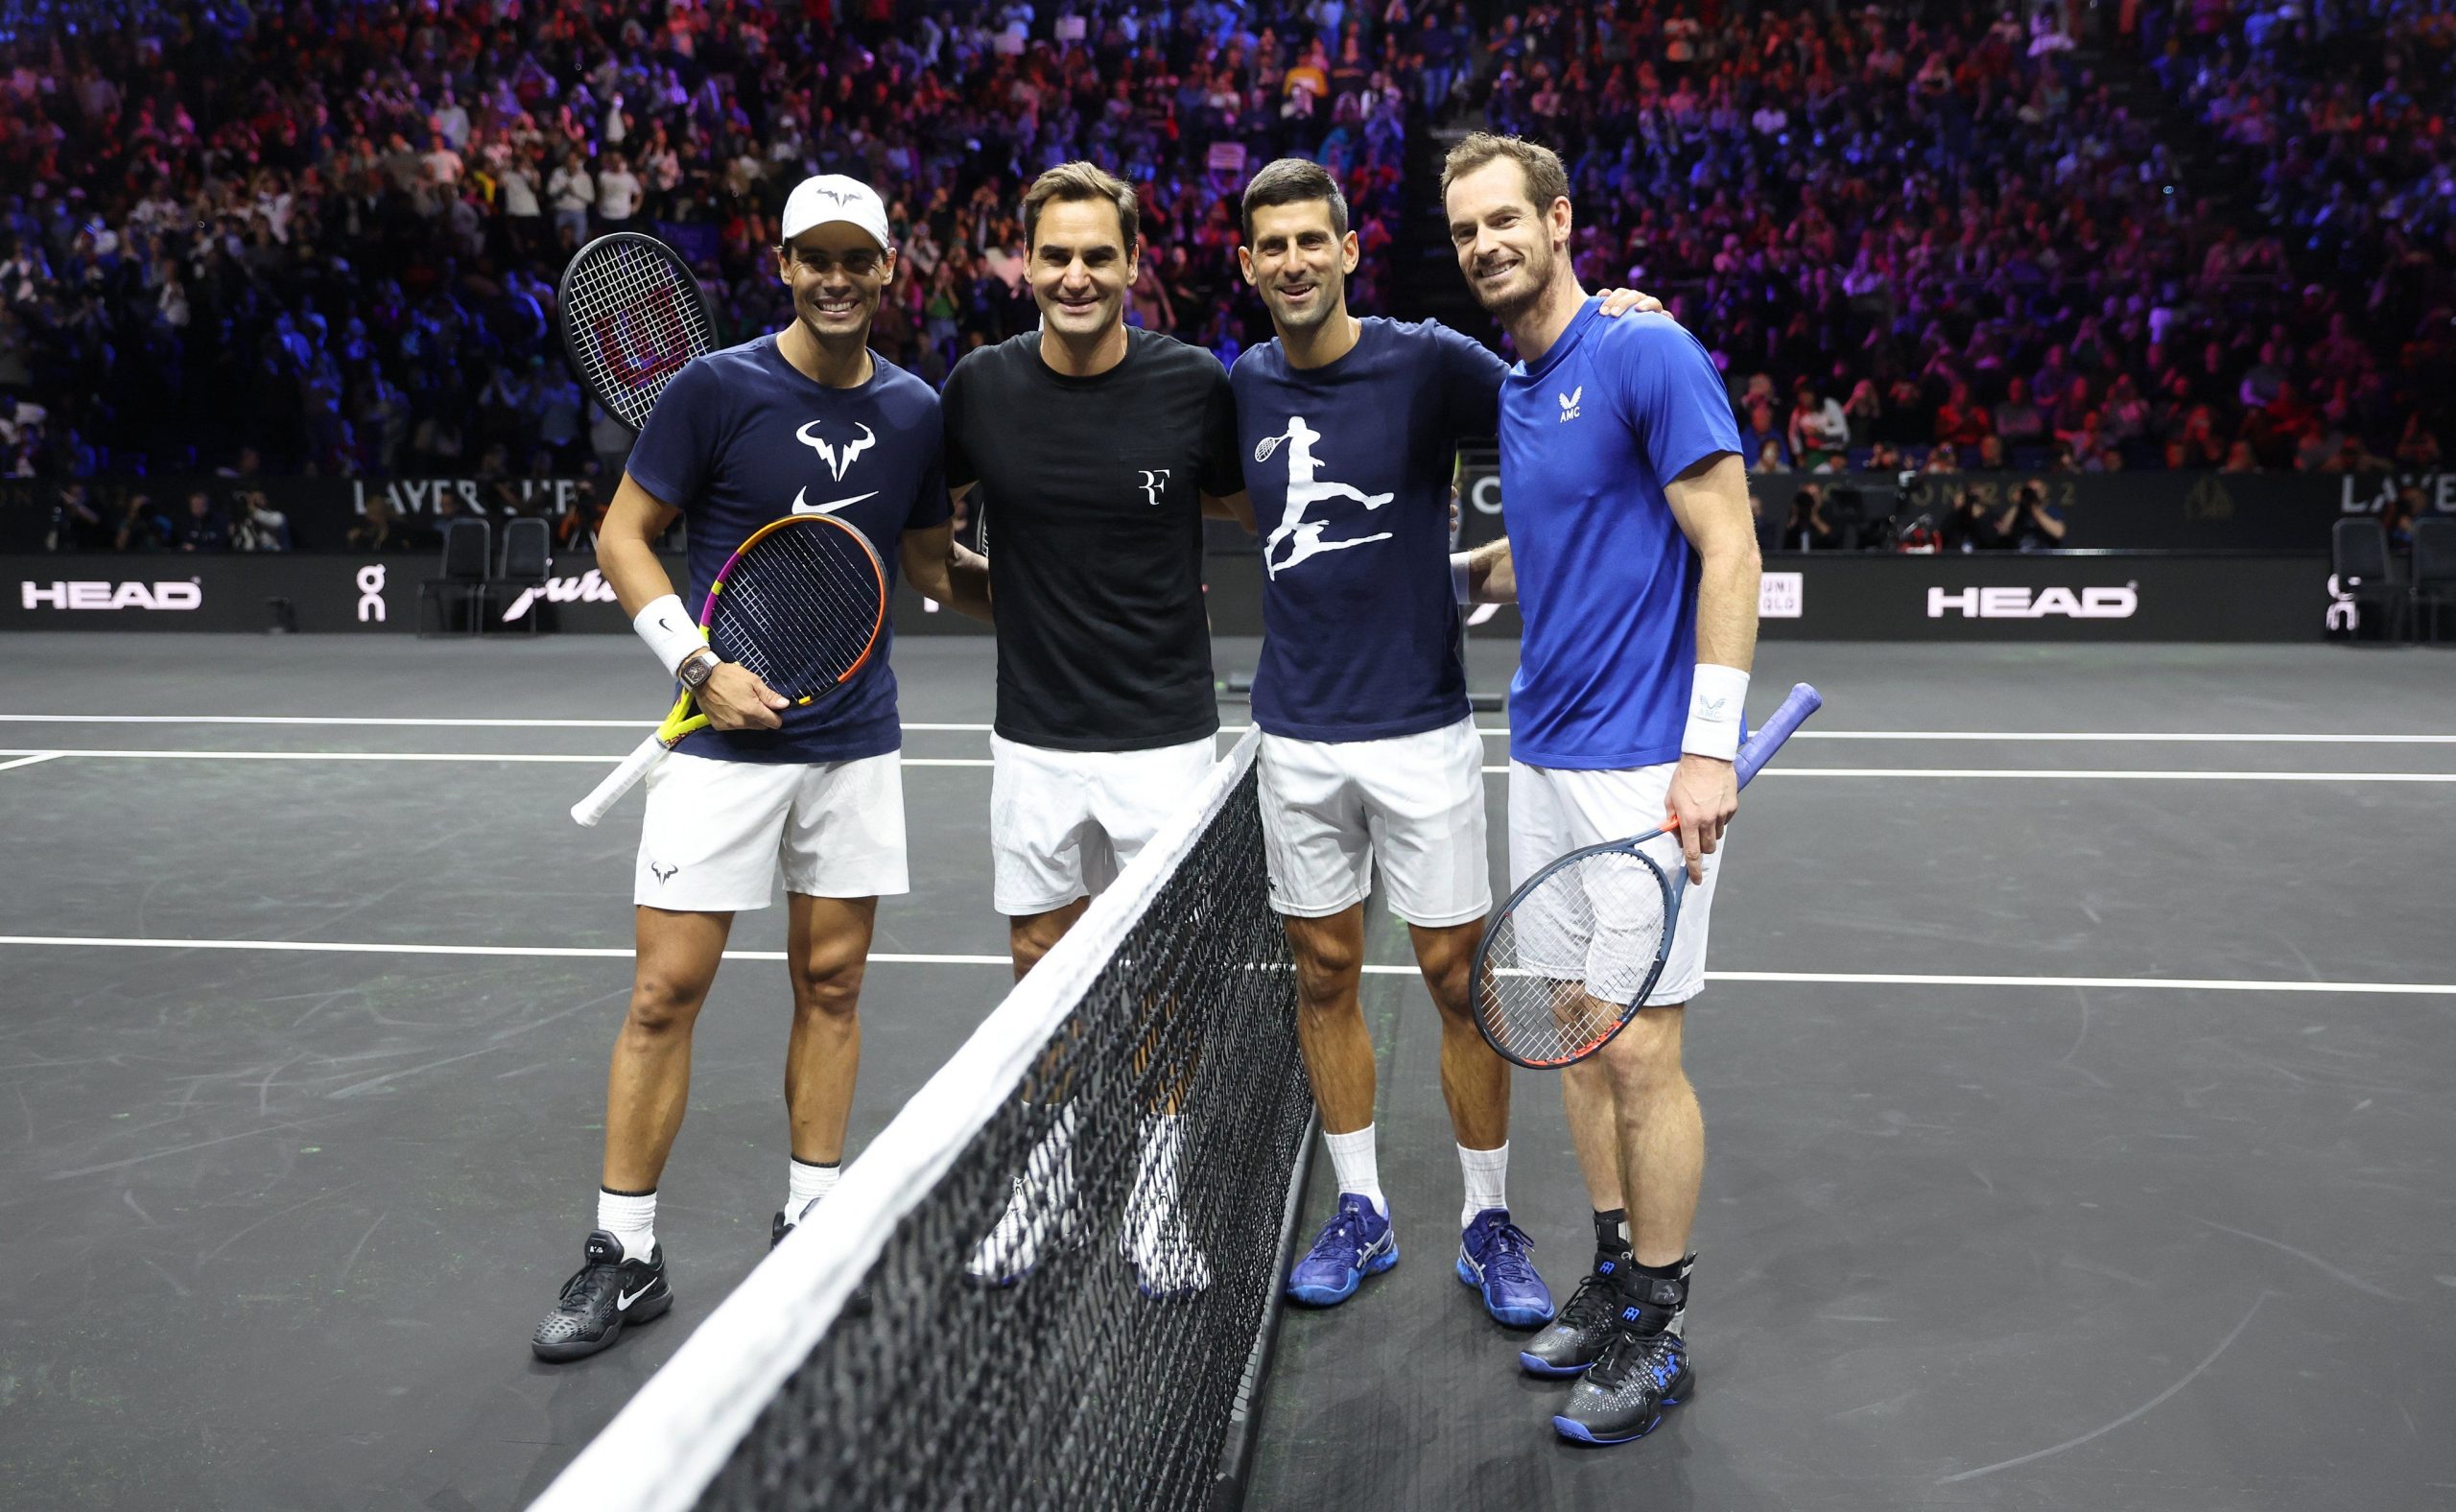 Laver Cup 2022: Prize money, format, and past winners